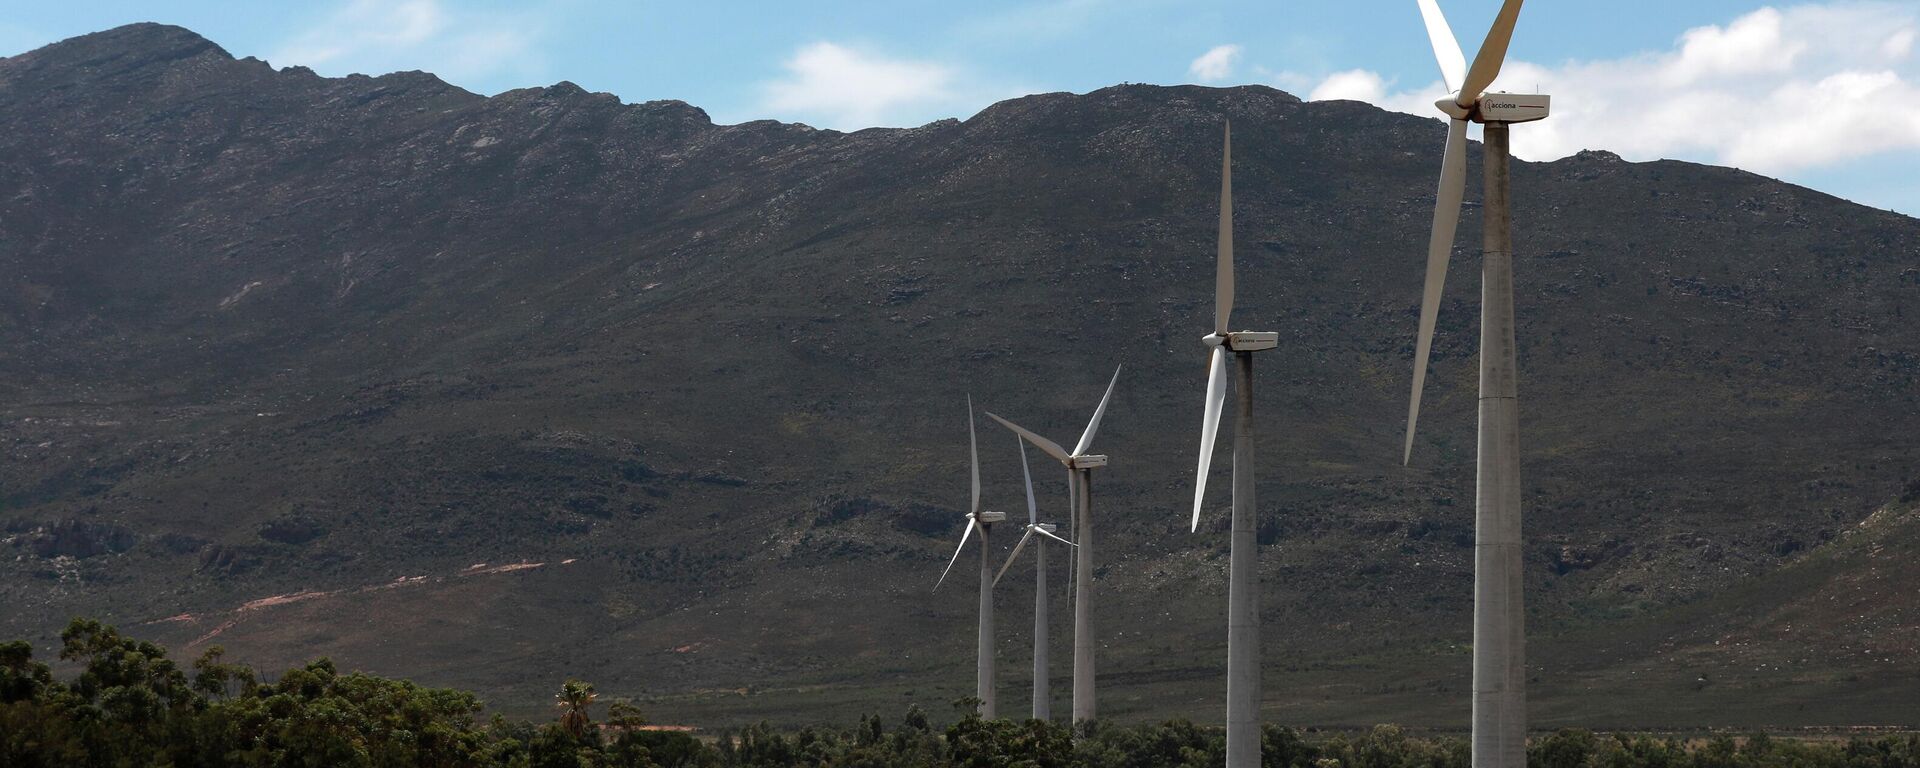 Wind turbines are seen at the Gouda Wind Farm located 115 km north east of Cape Town, South Africa, Monday, Nov. 7, 2022. The wind farm is one of the biggest in Southern Africa. - Sputnik International, 1920, 02.02.2023